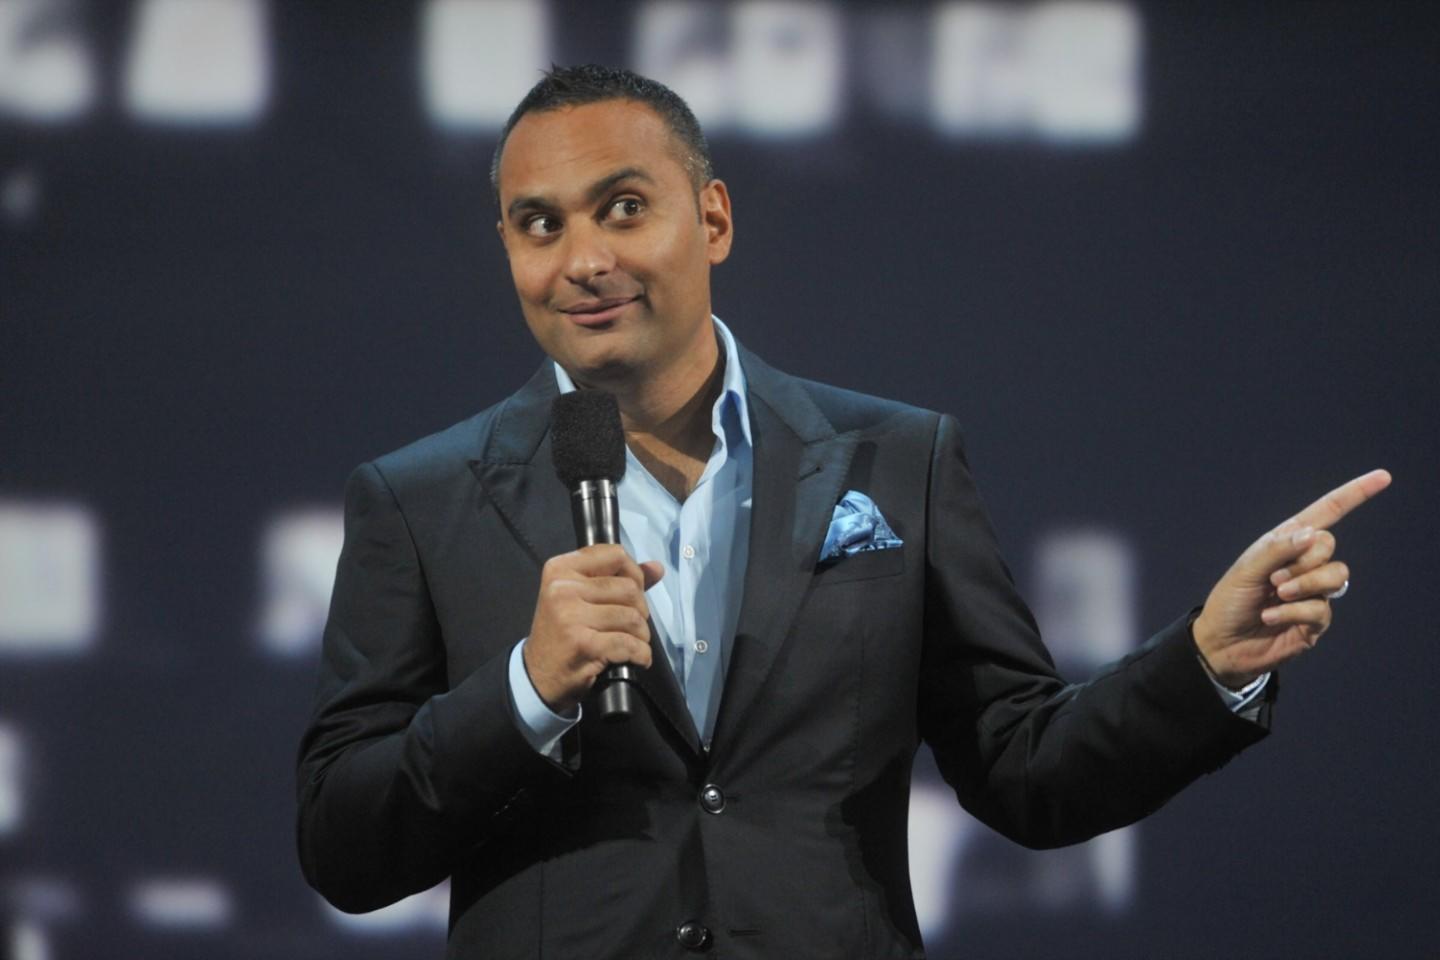 russell peters tour 2023